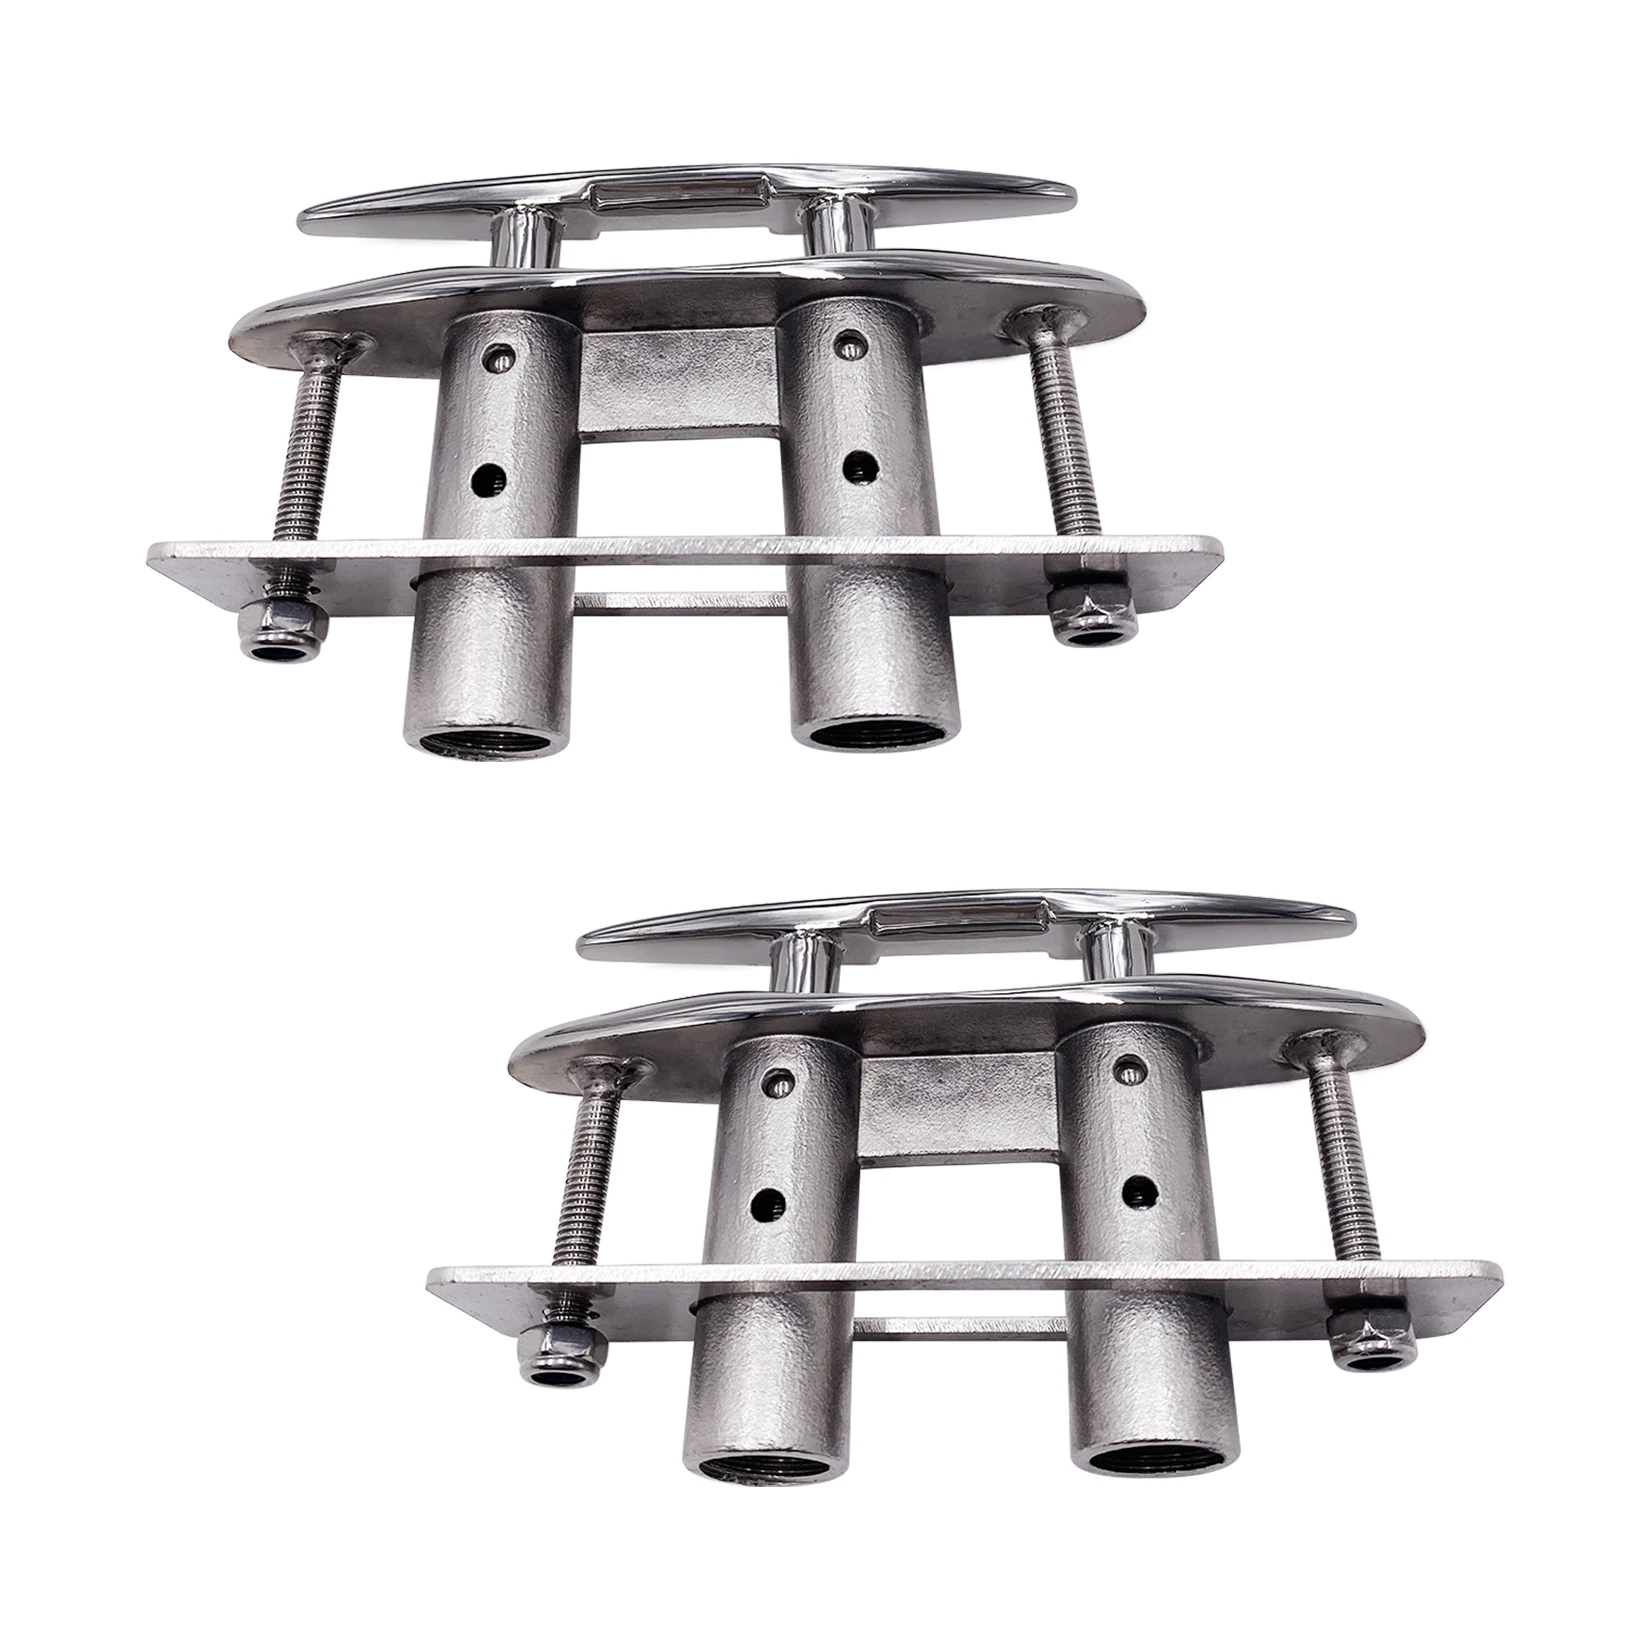 2 Pcs 5 inch Boat Pull Up Cleat Docking Marine Stainless Steel 316 Pop Up Cleat Retractable Cleat enlarge